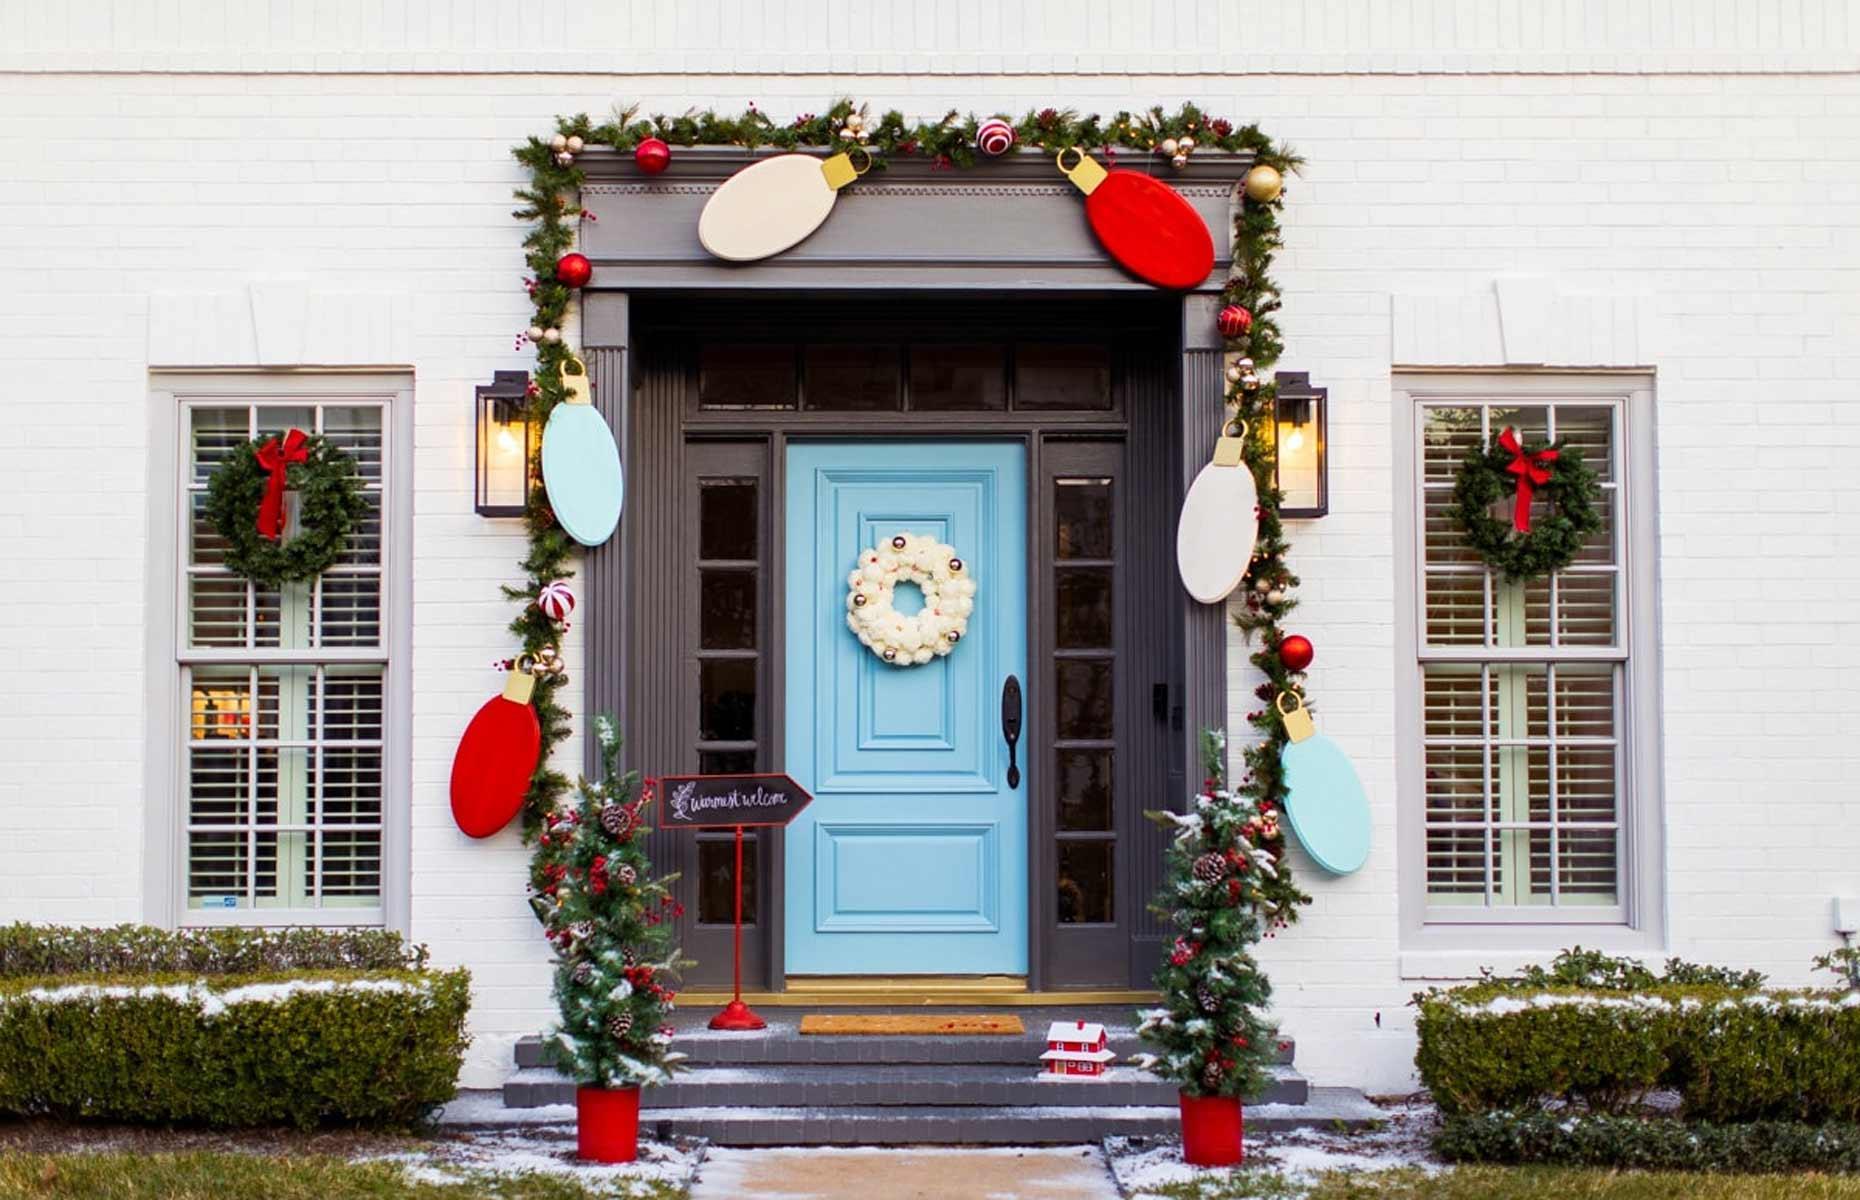 50 spectacular outdoor decorating ideas for the holidays | lovemoney.com